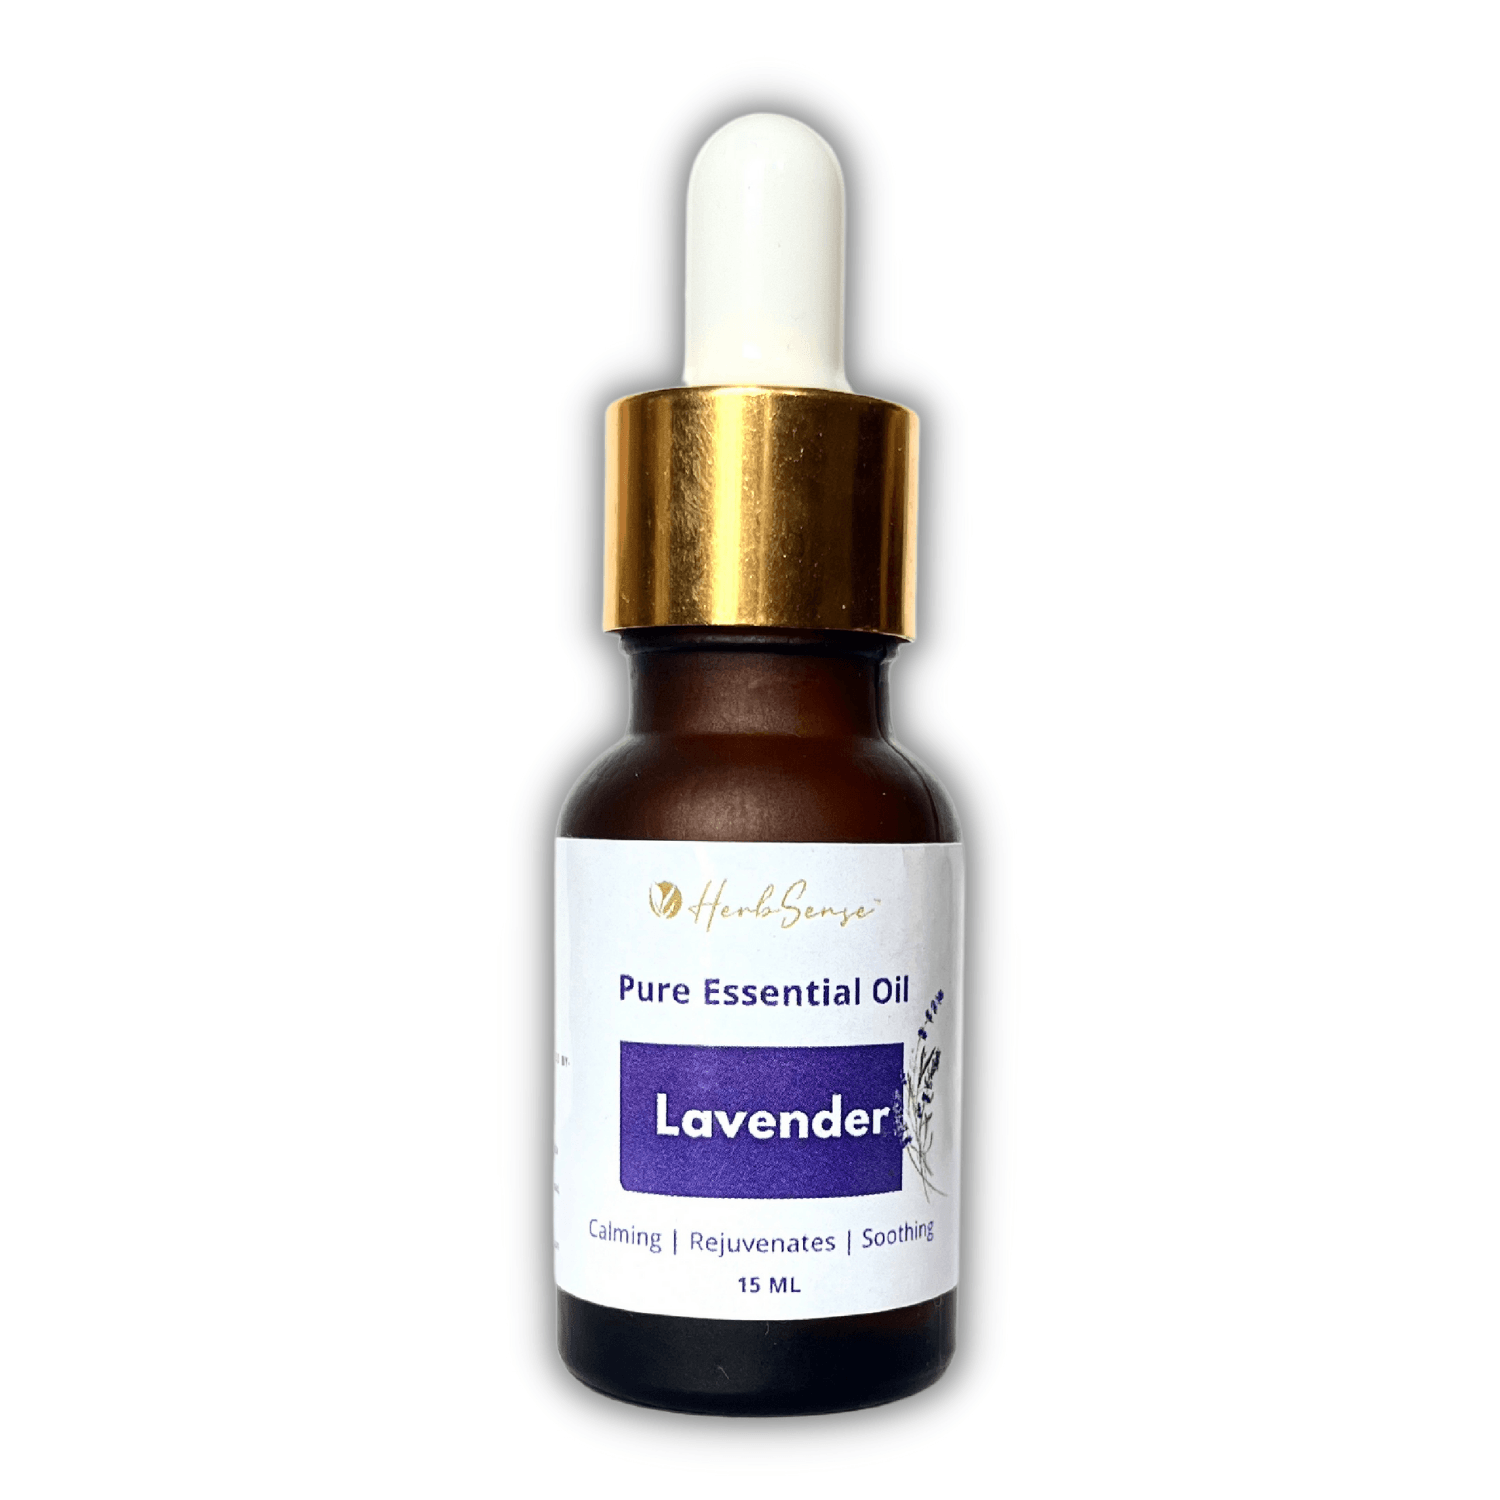 Lavender Essential Oil for Healthy Hair, Skin, Sleep - 100% Pure, Natural and Undiluted 15ML - Herbsense